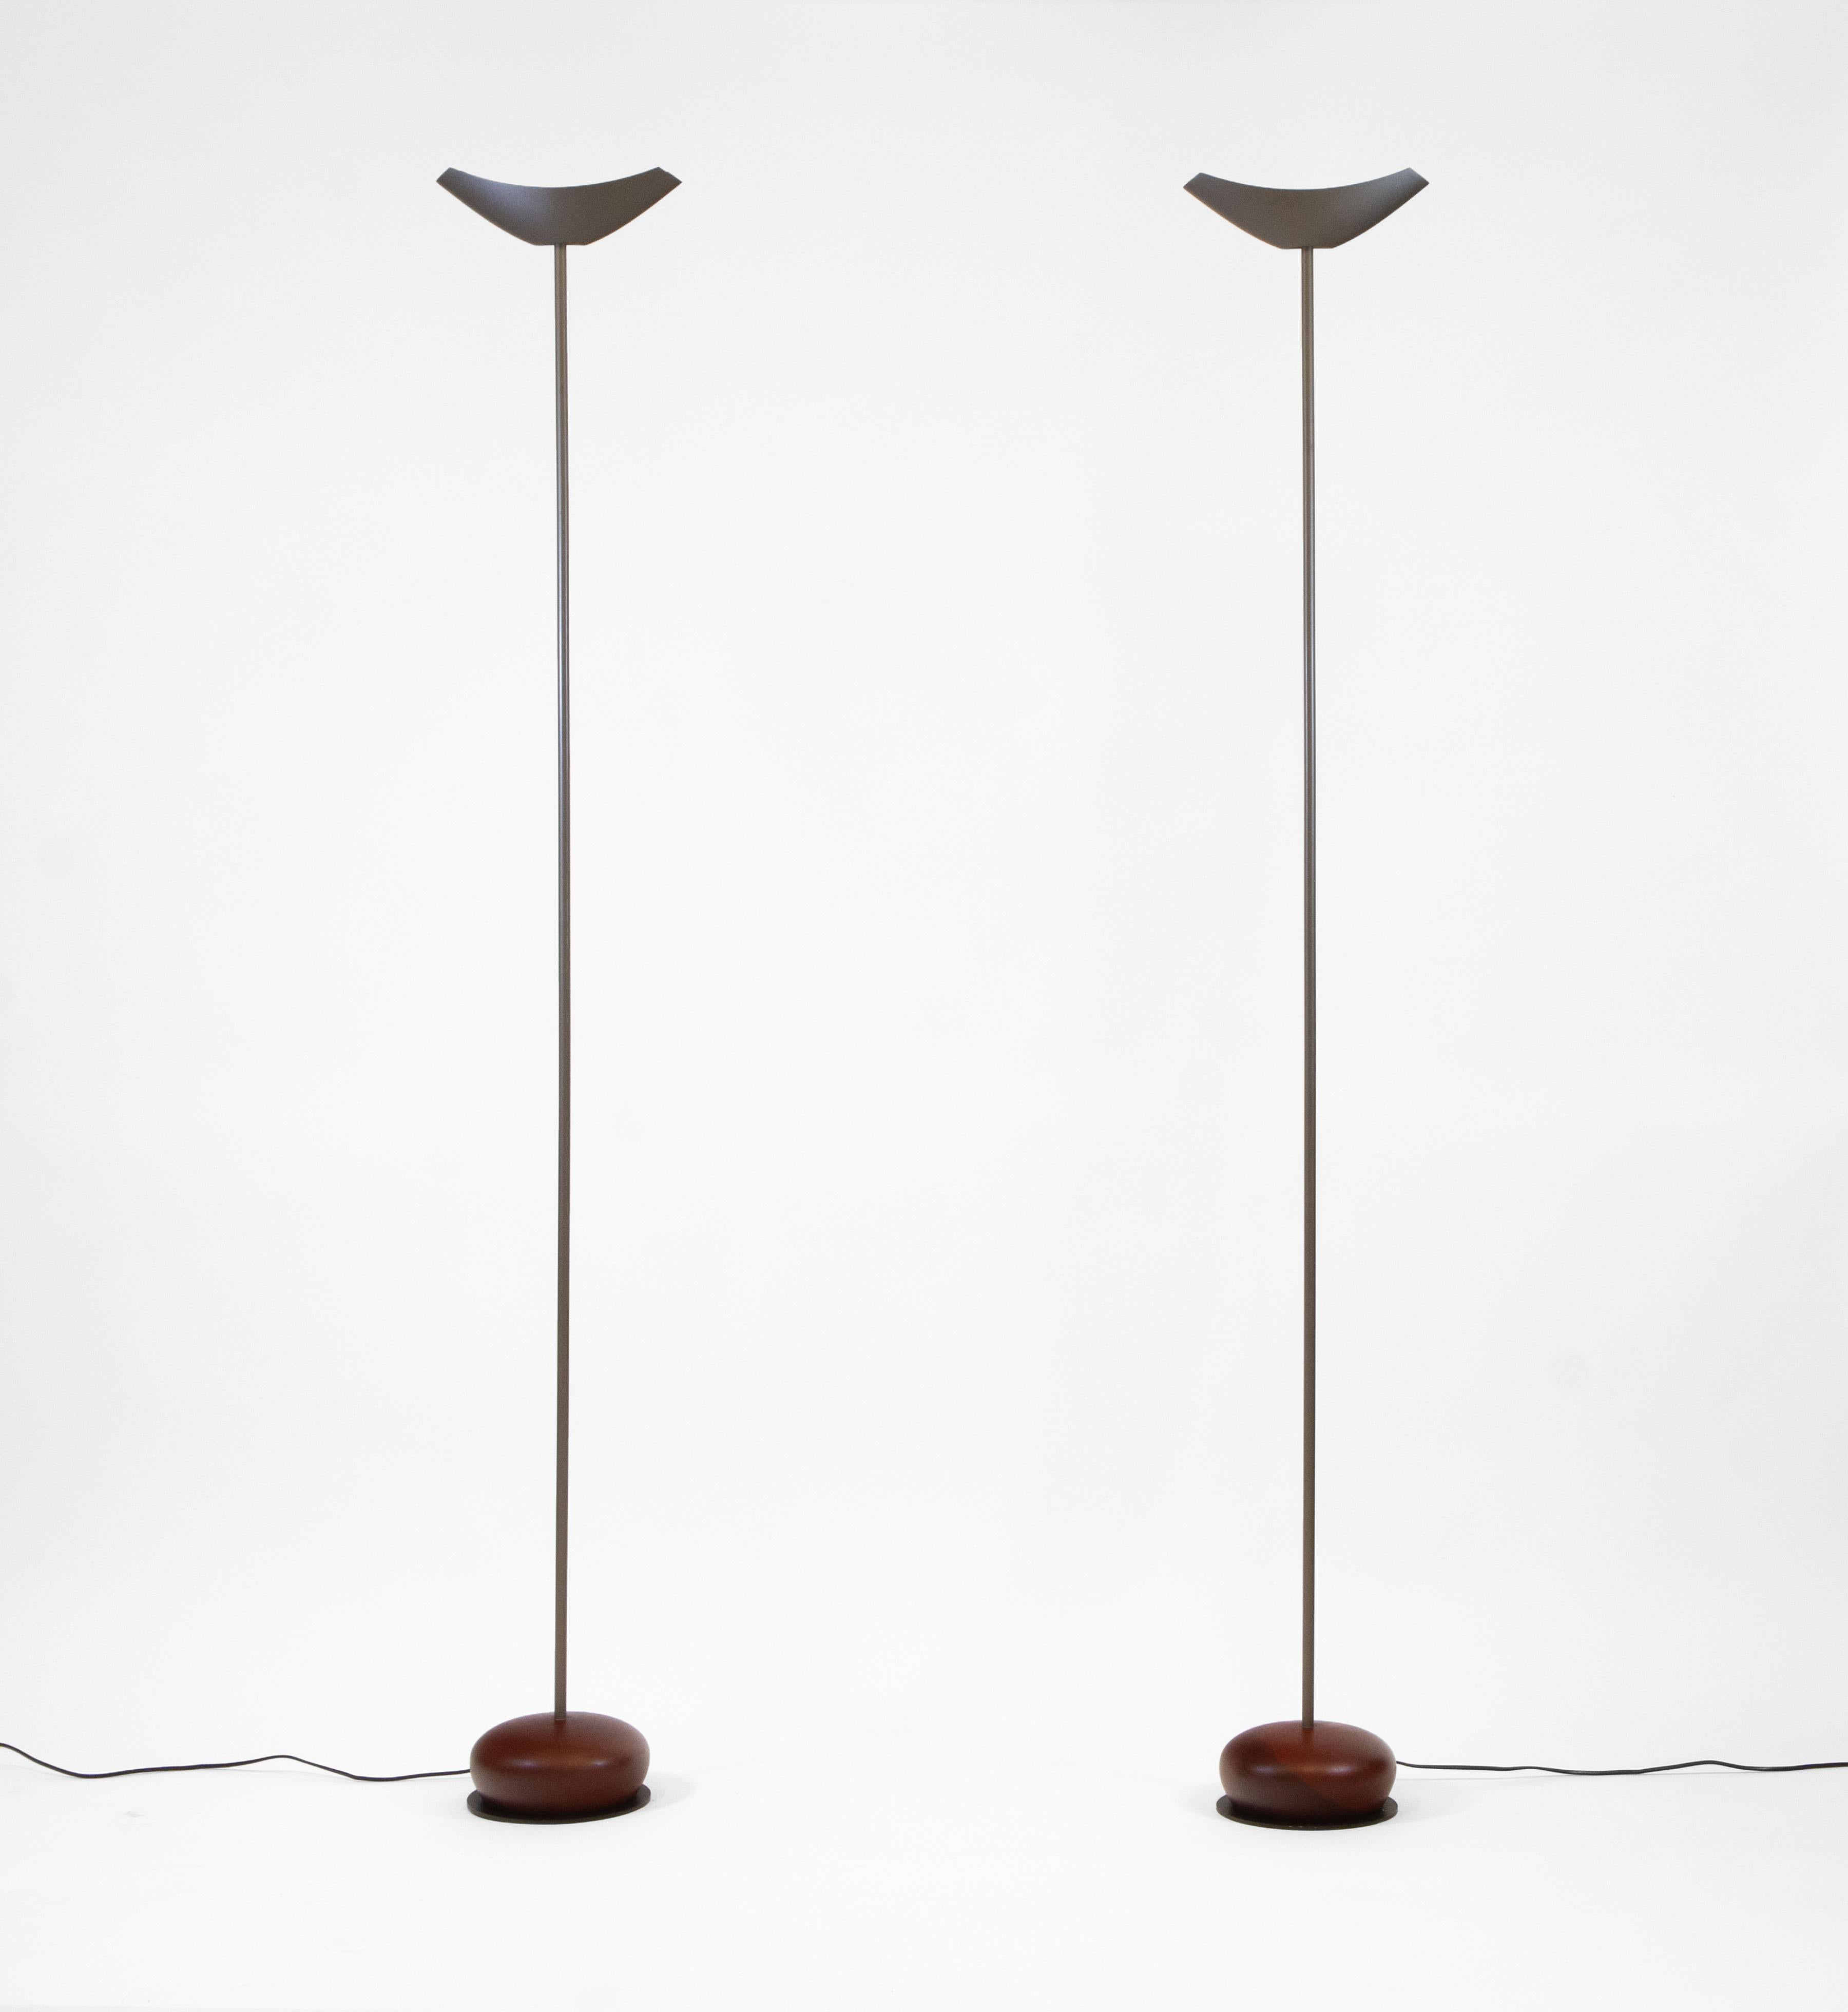 Pair Vintage Uplighter Floor Lamps By Josep Llusca 'Servul F' For Flos Italy  For Sale 4